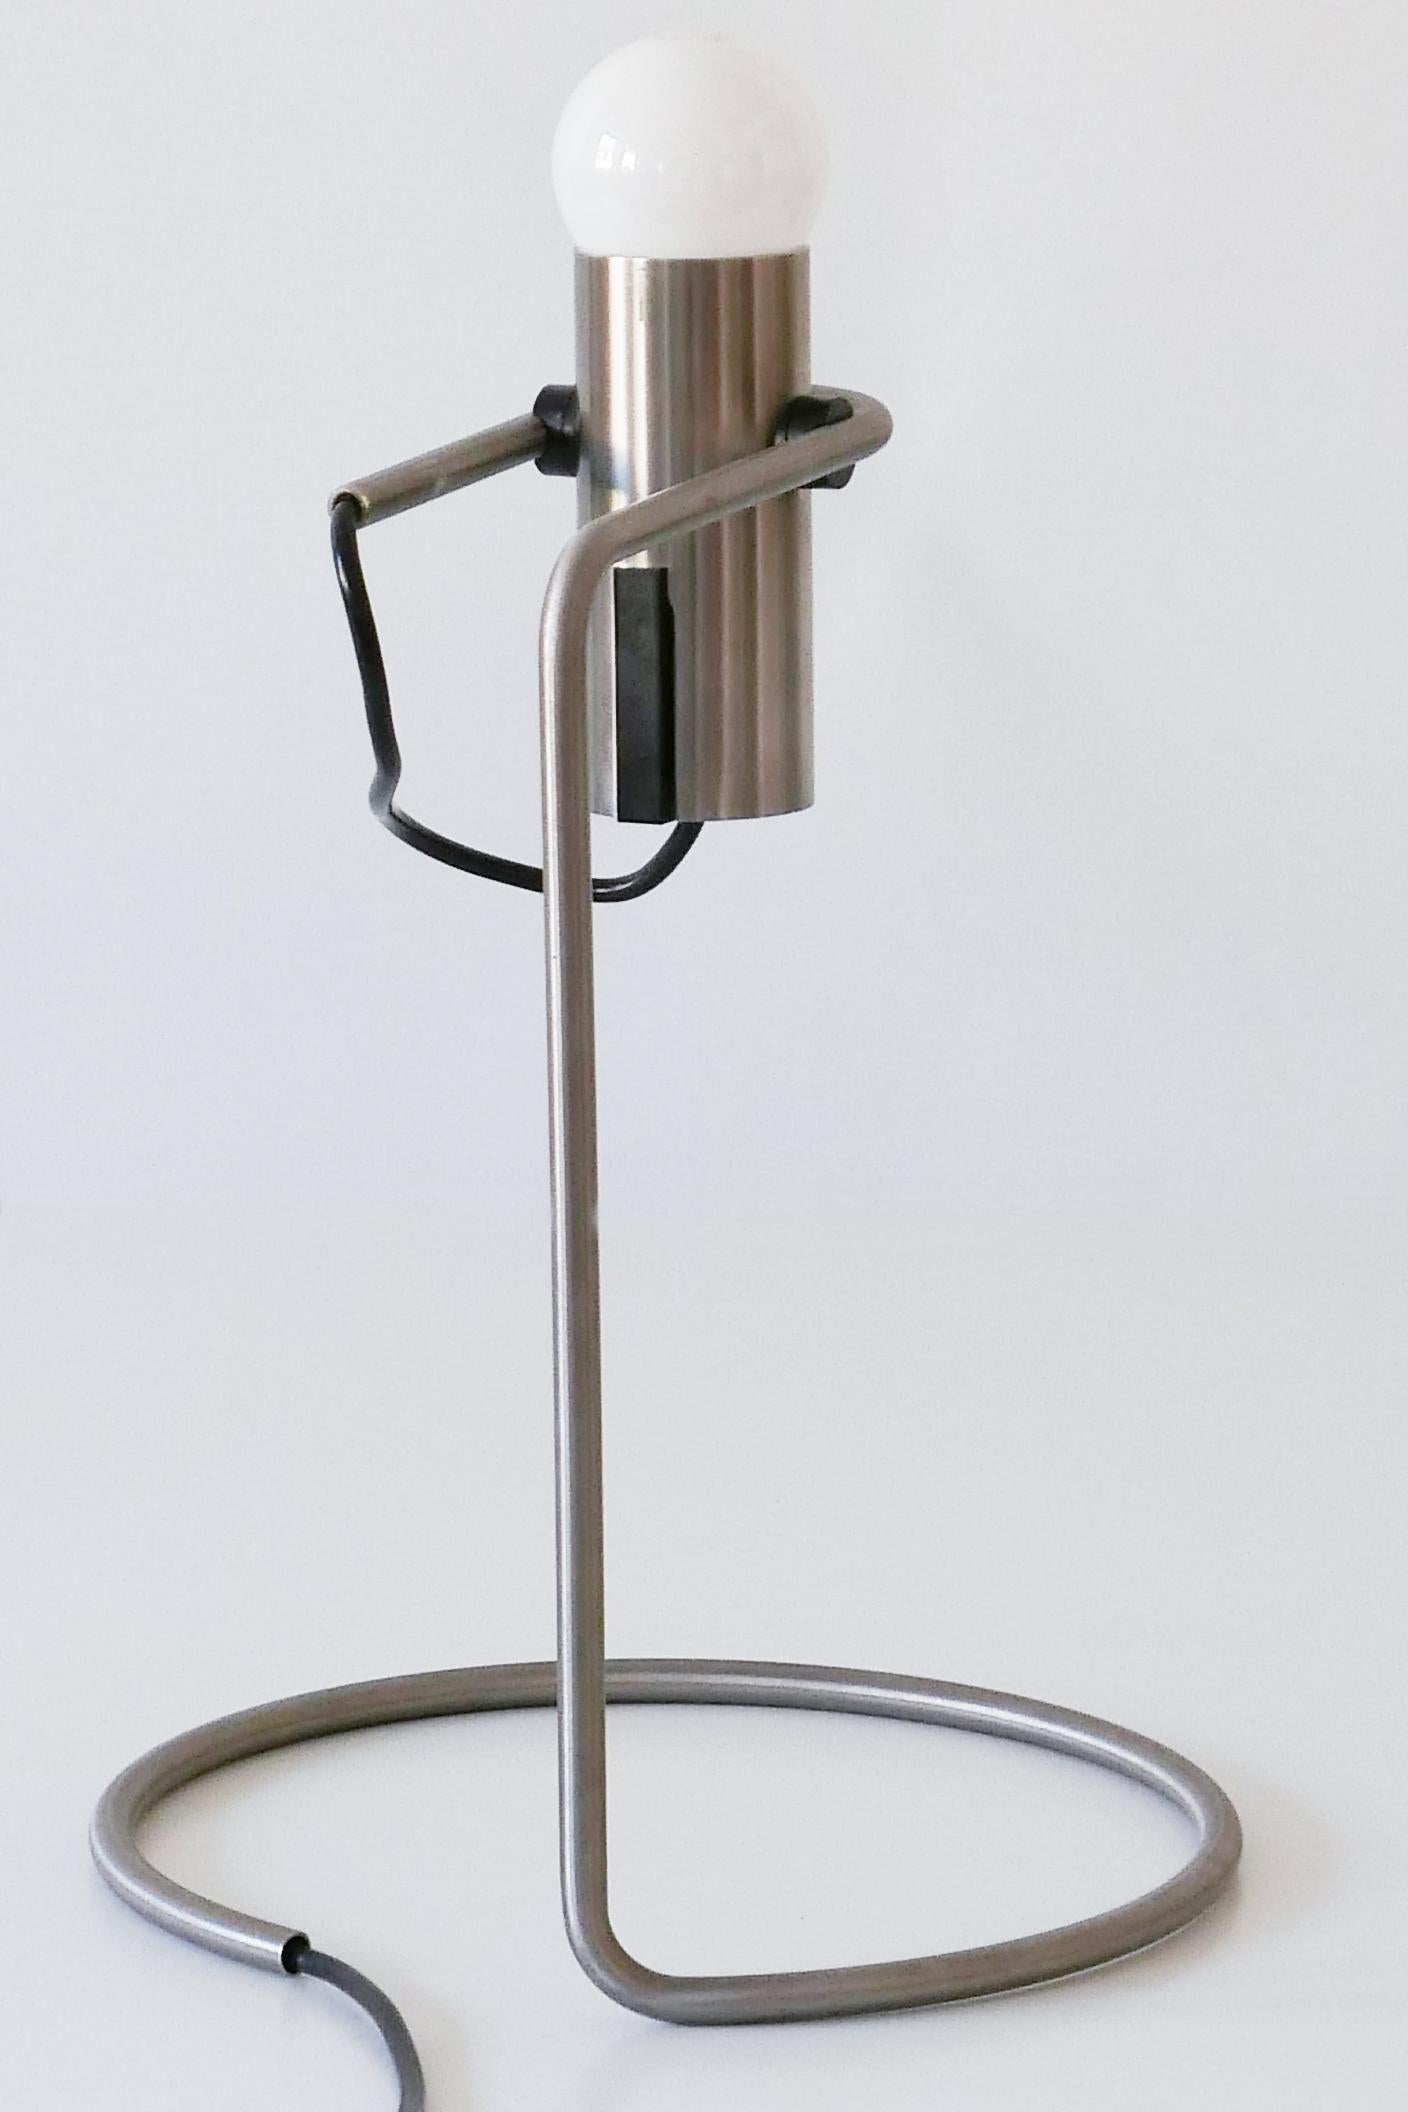 Exceptional Minimalistic Mid-Century Modern Table Lamp or Desk Light, 1960s For Sale 6